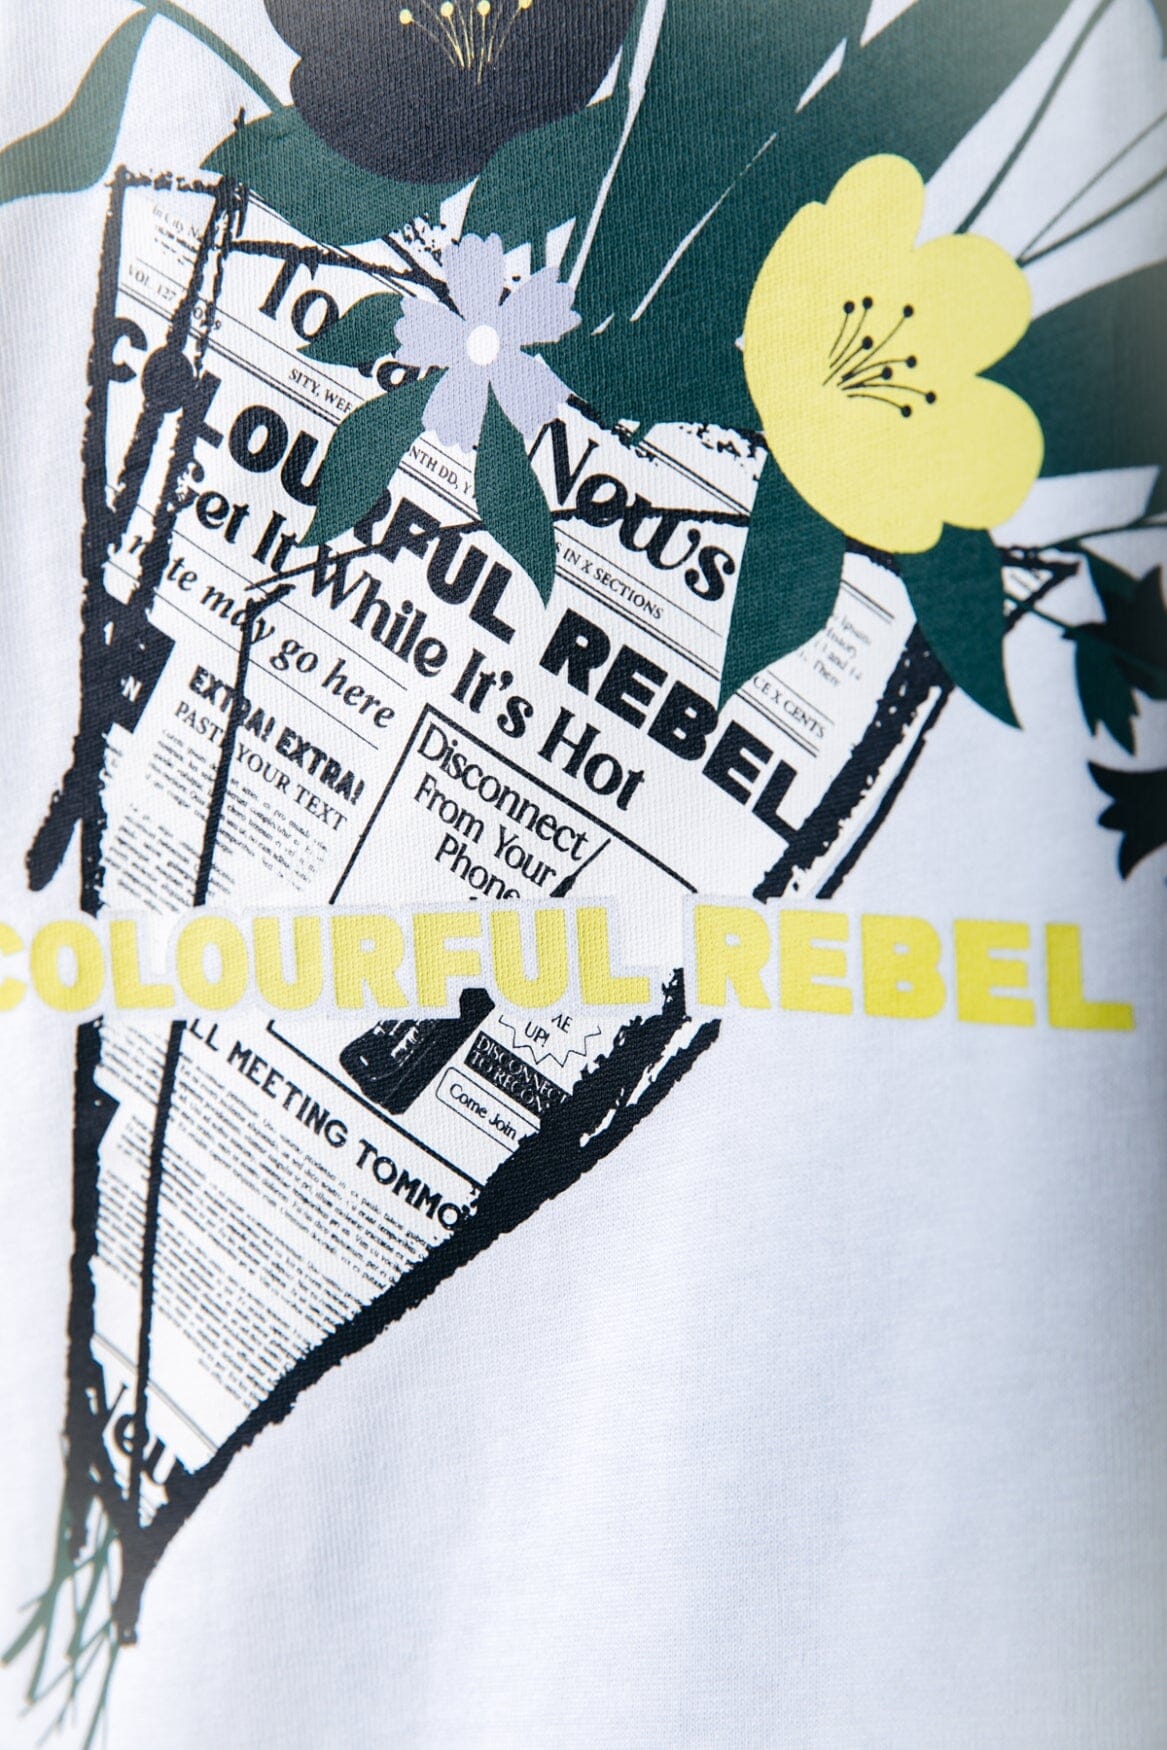 Colourful Rebel Flower Bouquet Basic Tee | White 